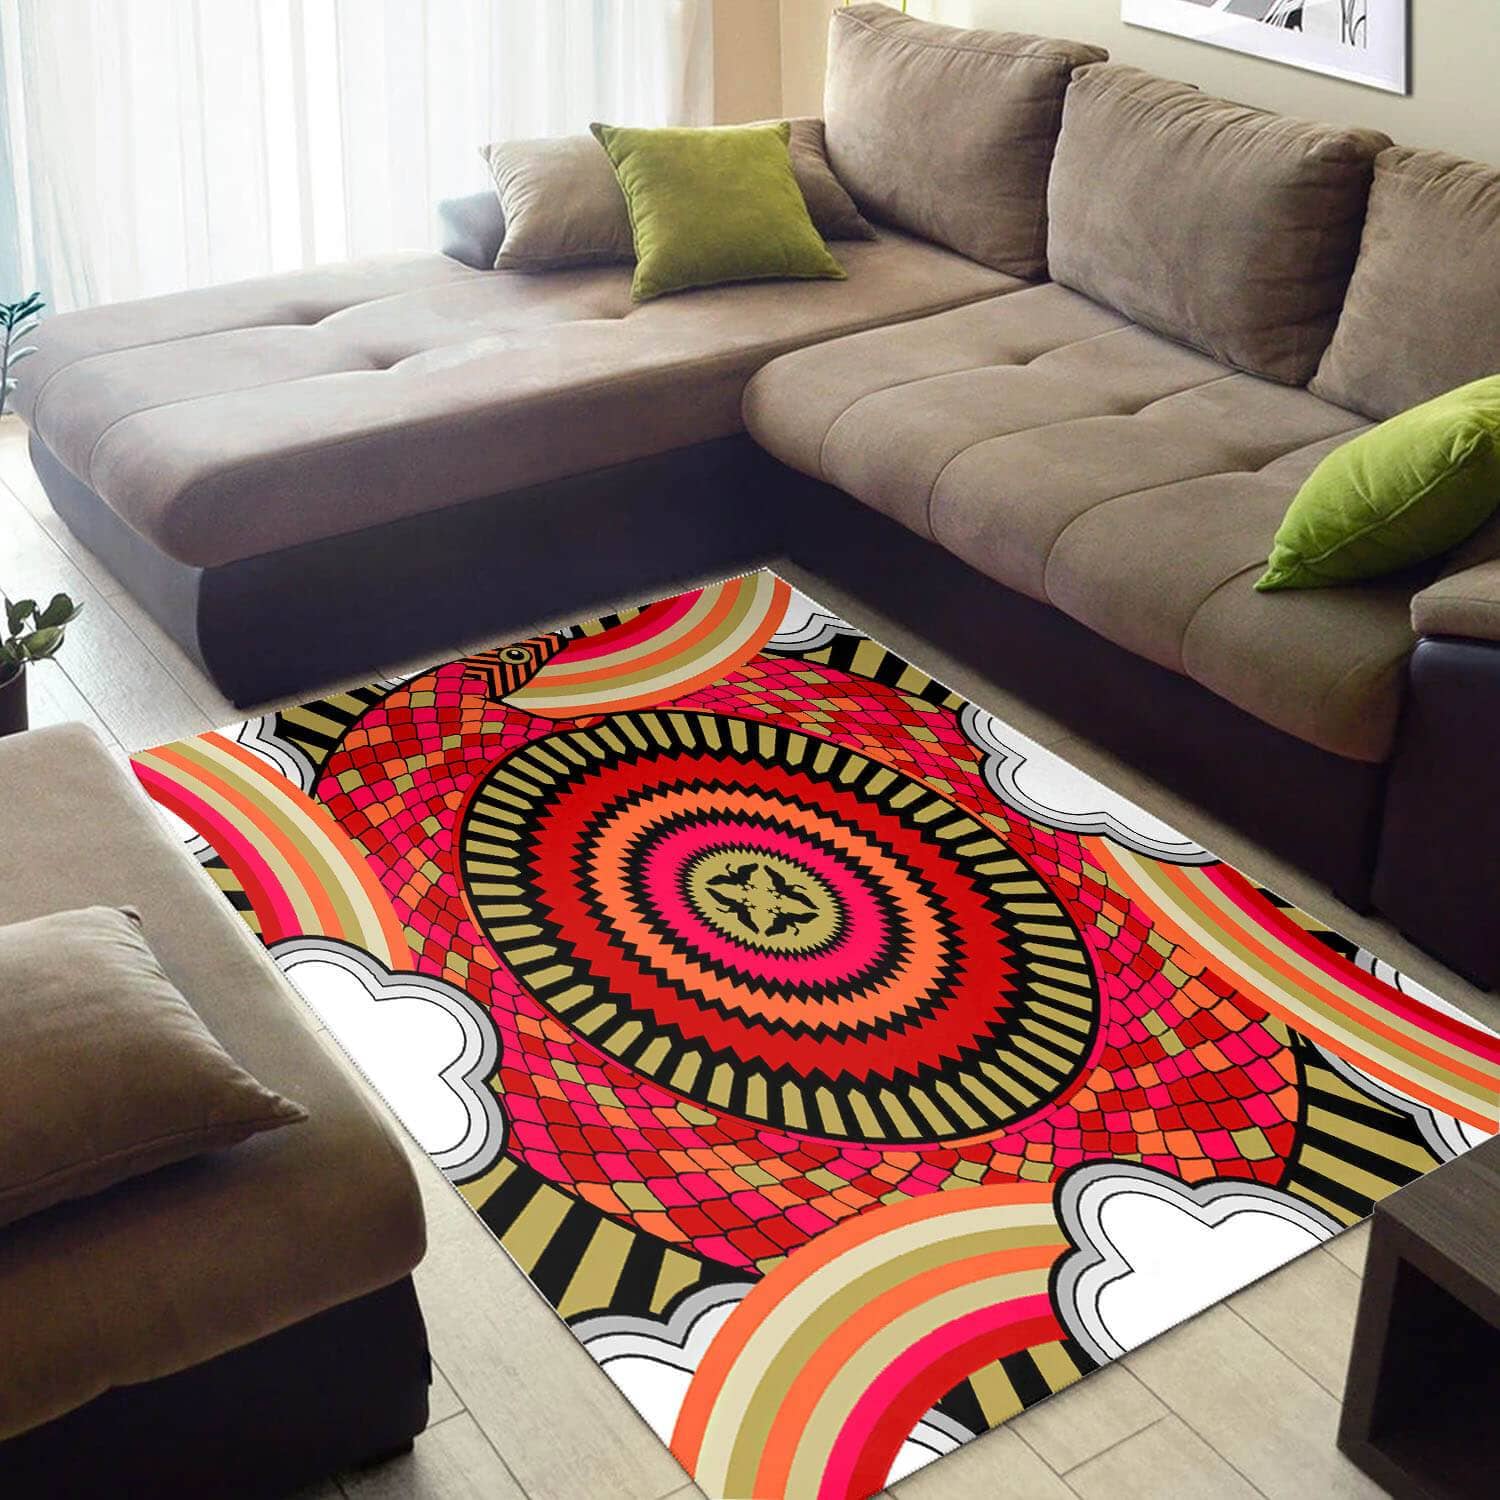 Modern African Style Holiday American Ethnic Seamless Pattern Design Floor Carpet Living Room Rug